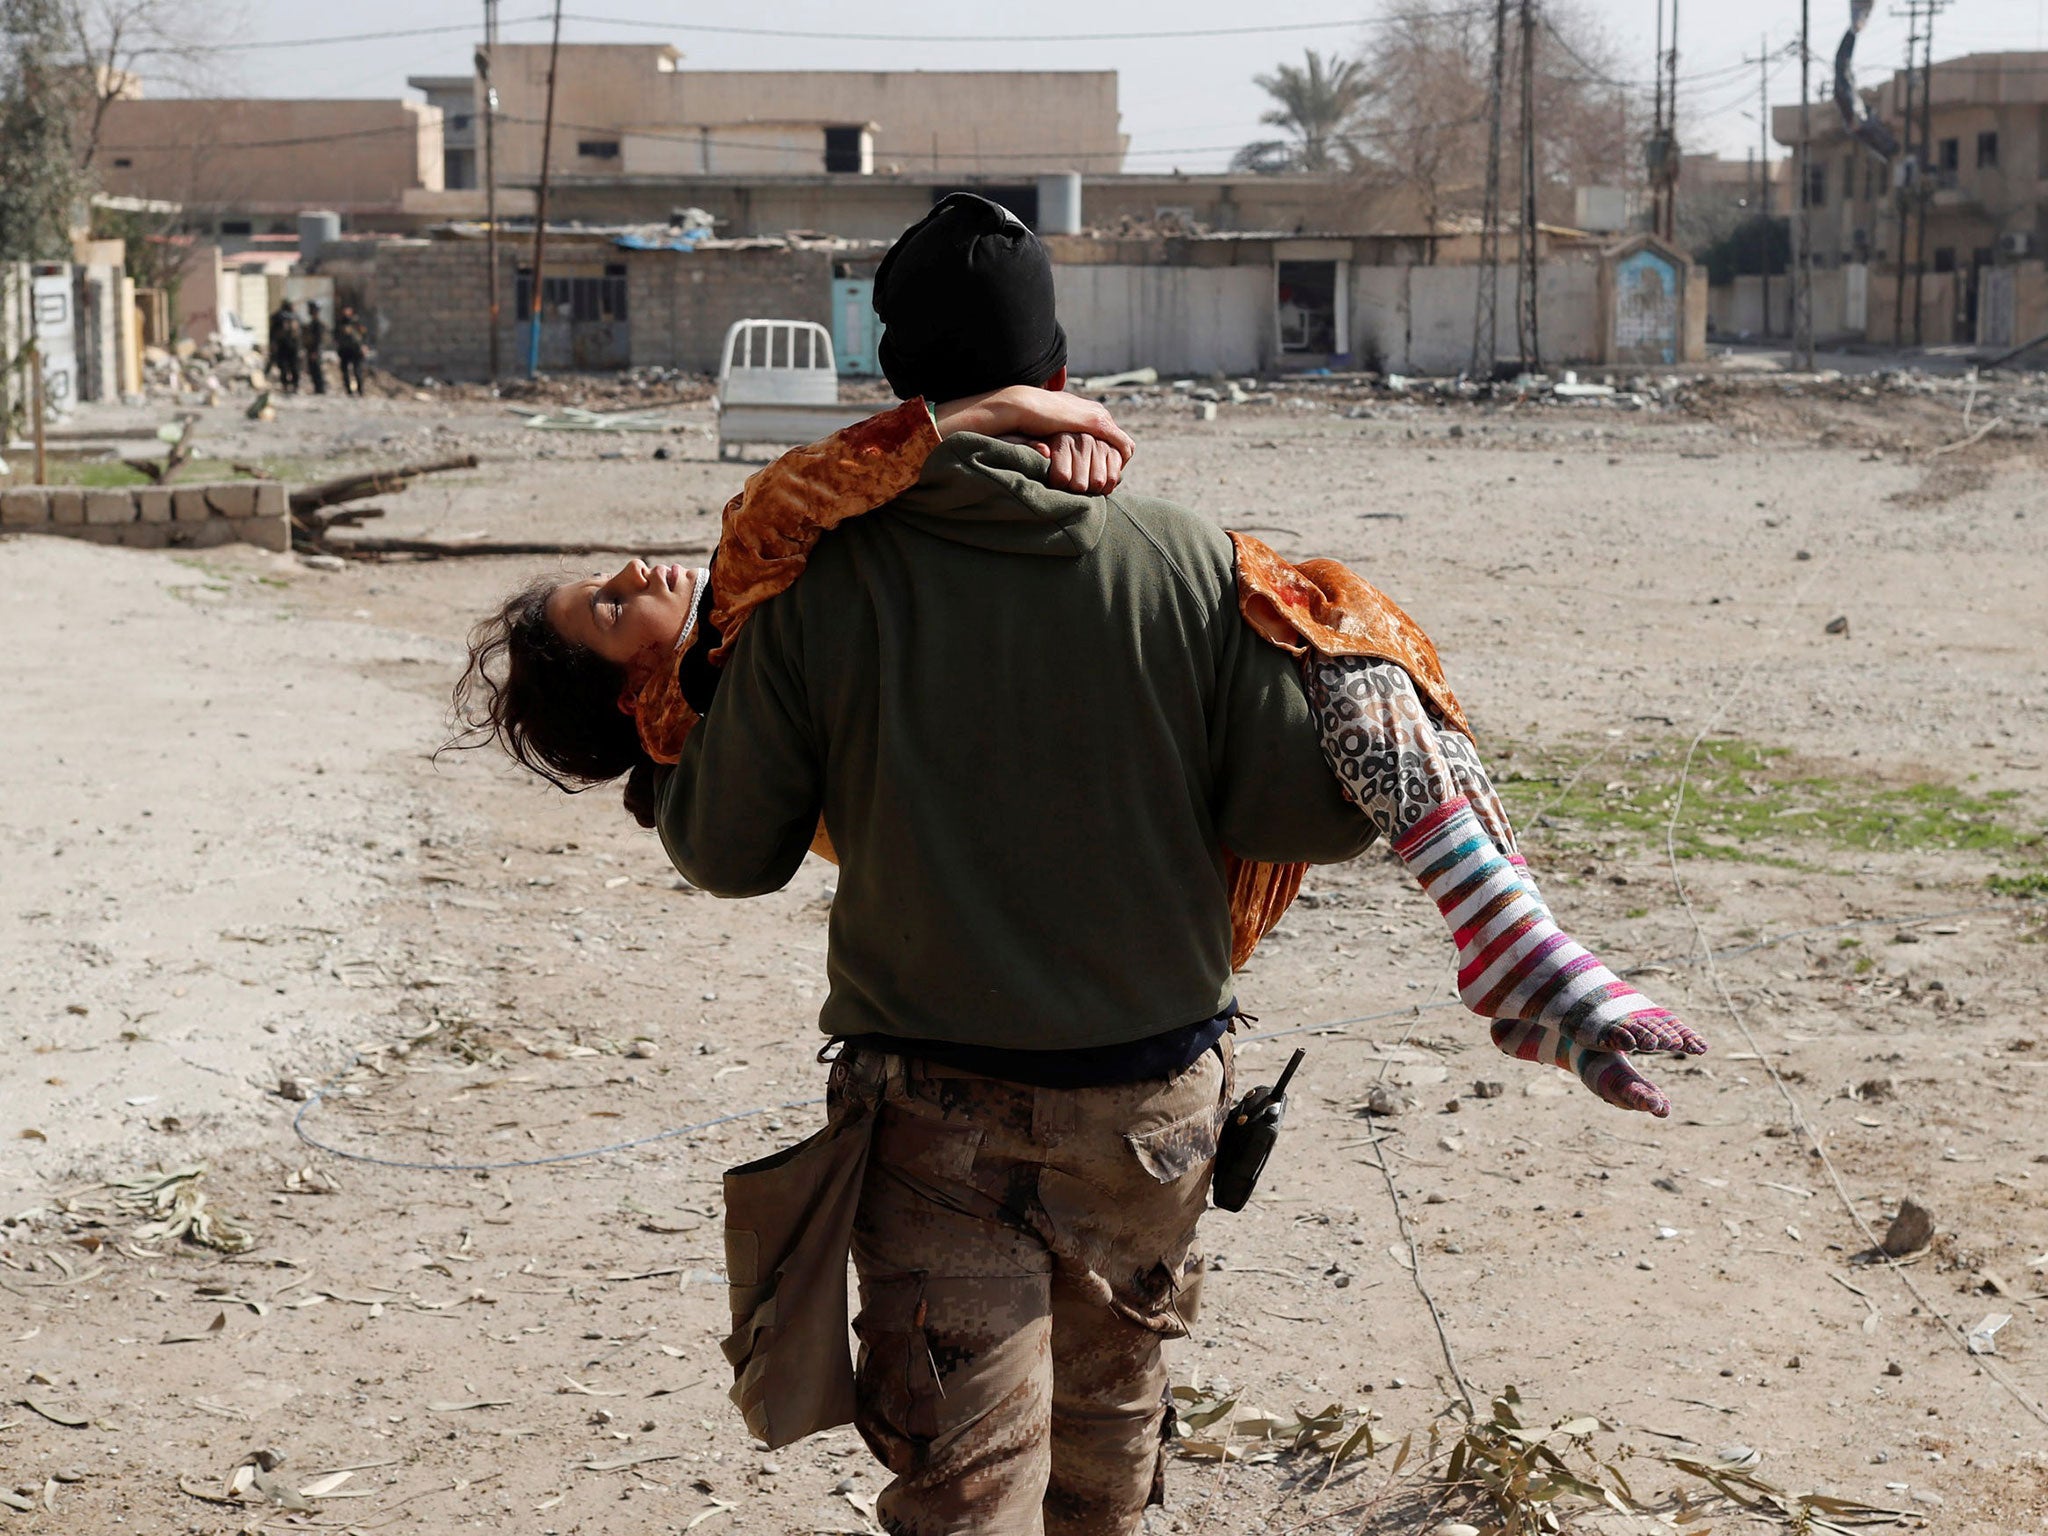 An Iraqi soldier carries a woman injured during a battle between Iraqi forces and Isis fighters in Mosul today